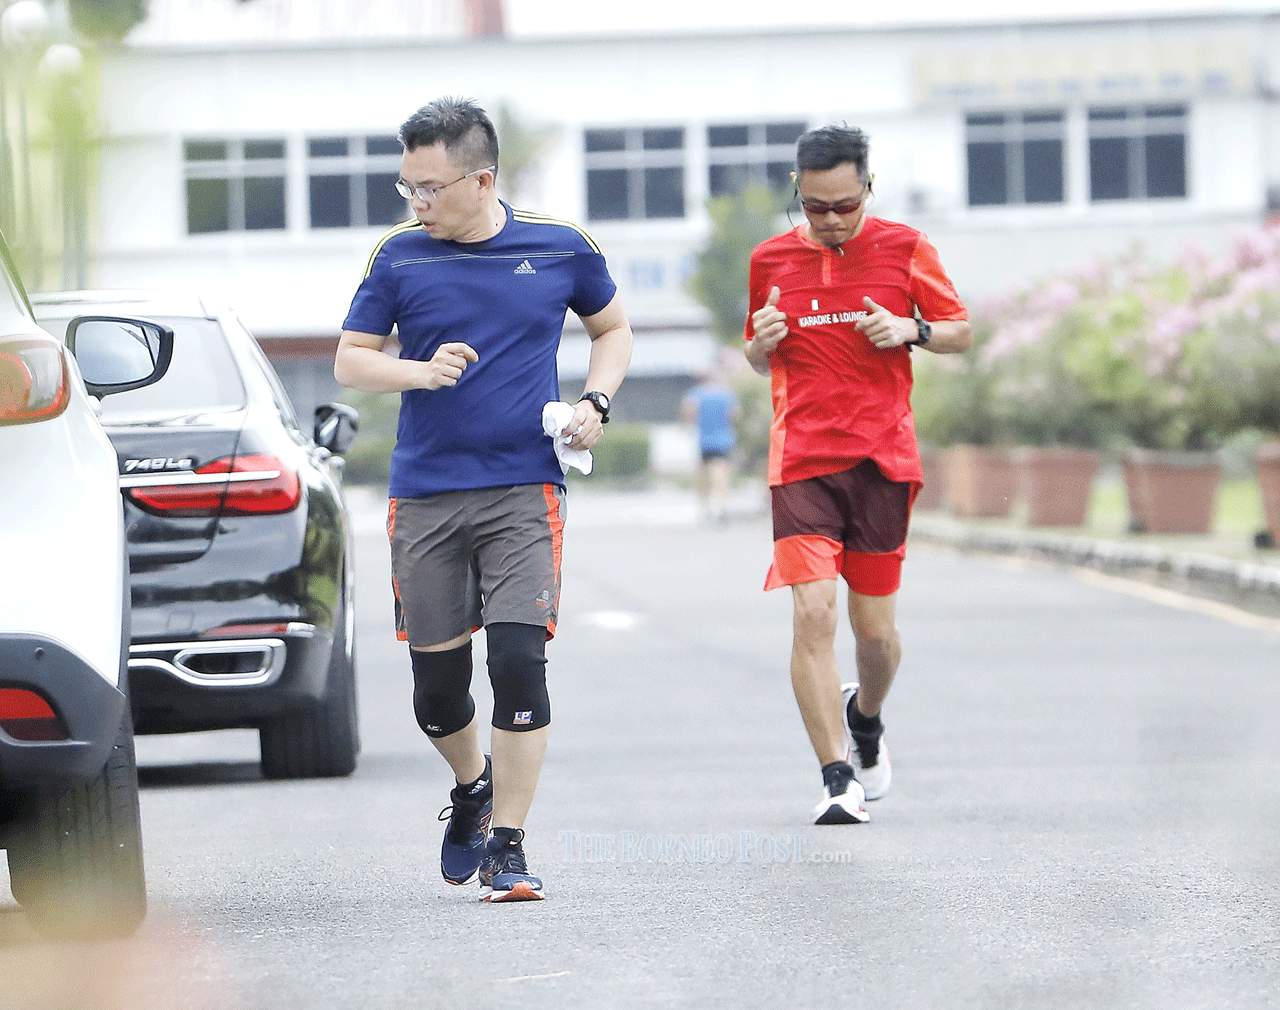 Only Jogging Light Exercise In Own Neighbourhood Okay During Mco In Sarawak